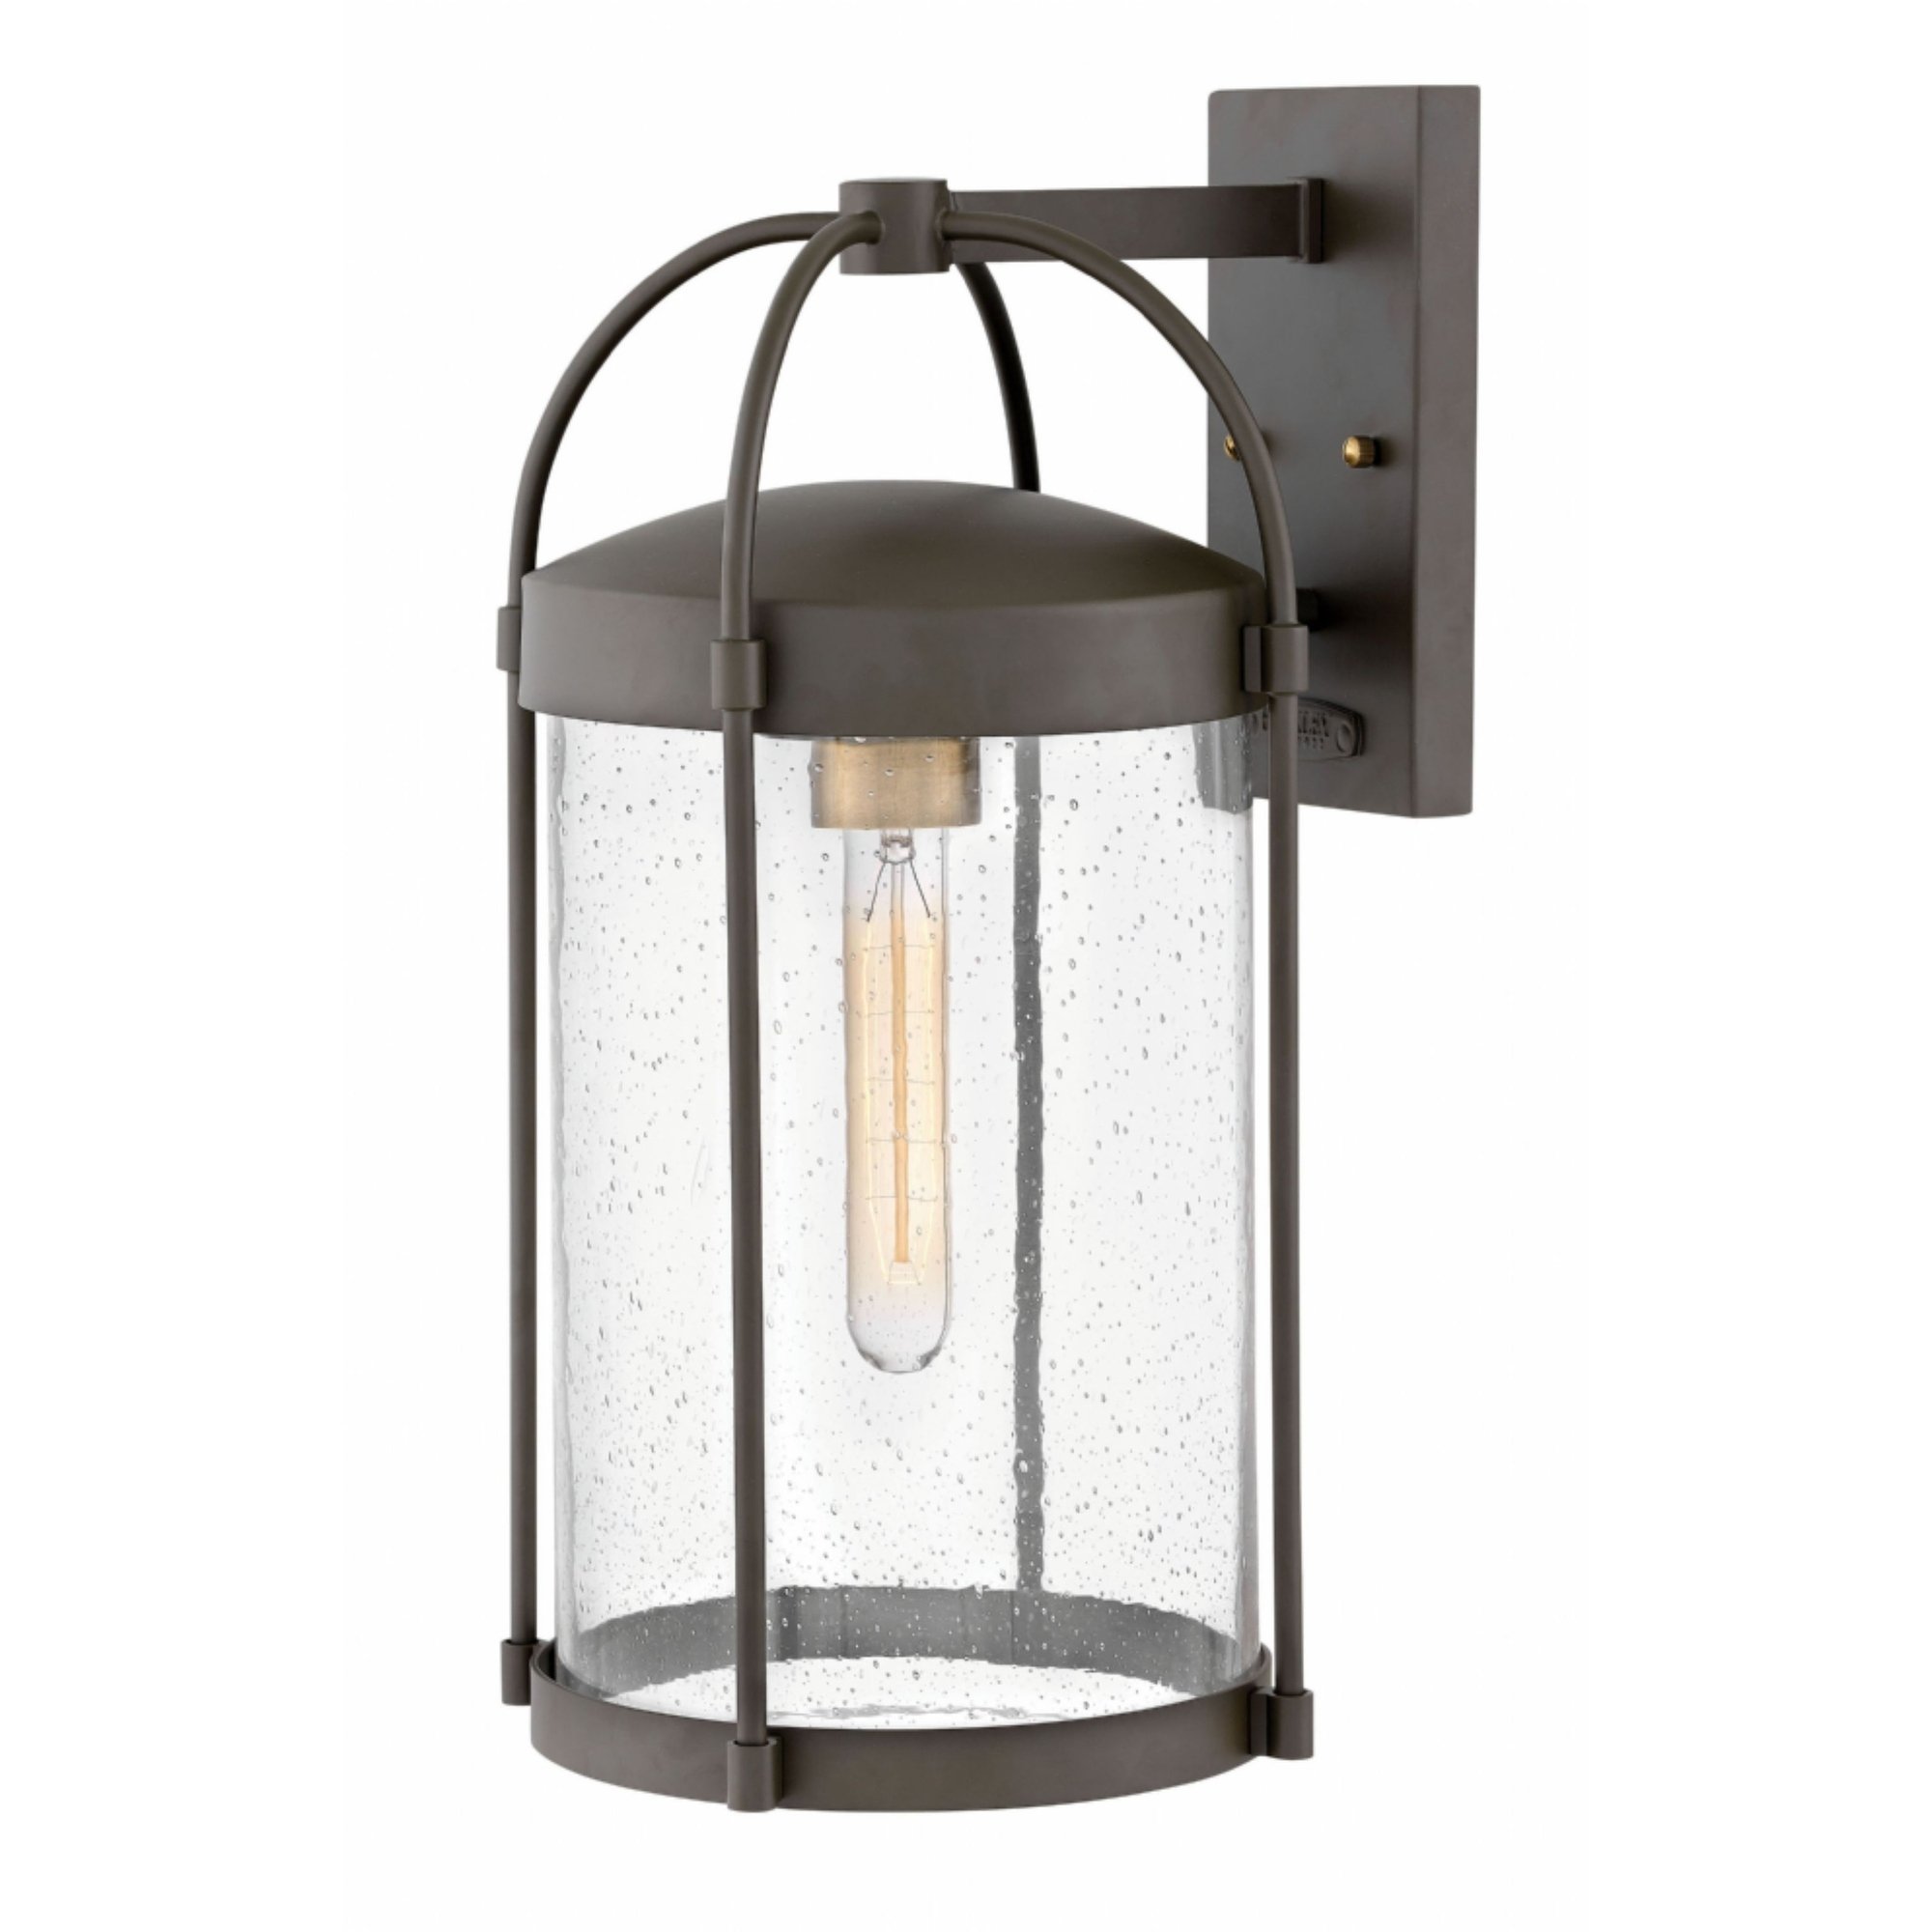 Hinkley Lighting - Drexler - One Light Outdoor Large Wall Mount   Oil Rubbed - image 2 of 2